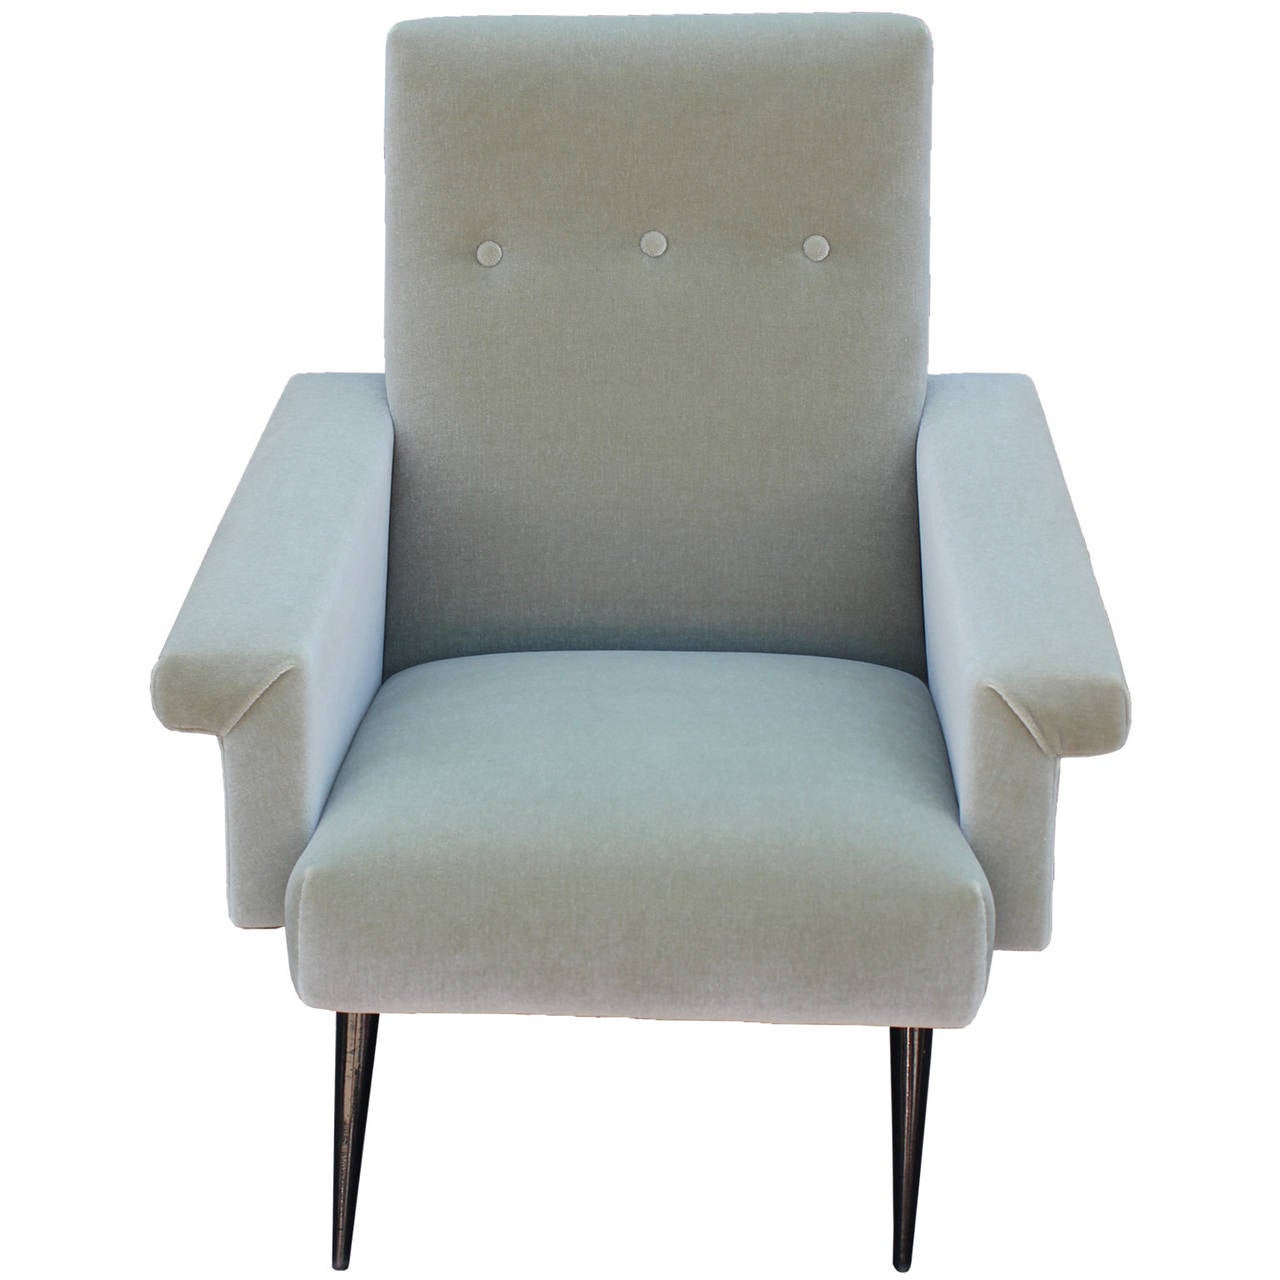 Beautiful pair of sculptural Italian lounge chairs in the style of Marco Zanuso or Gio Ponti. Chairs are freshly upholstered in a luxe pale blue-green mohair velvet.  Thin, tapered black lacquer legs add contrast.